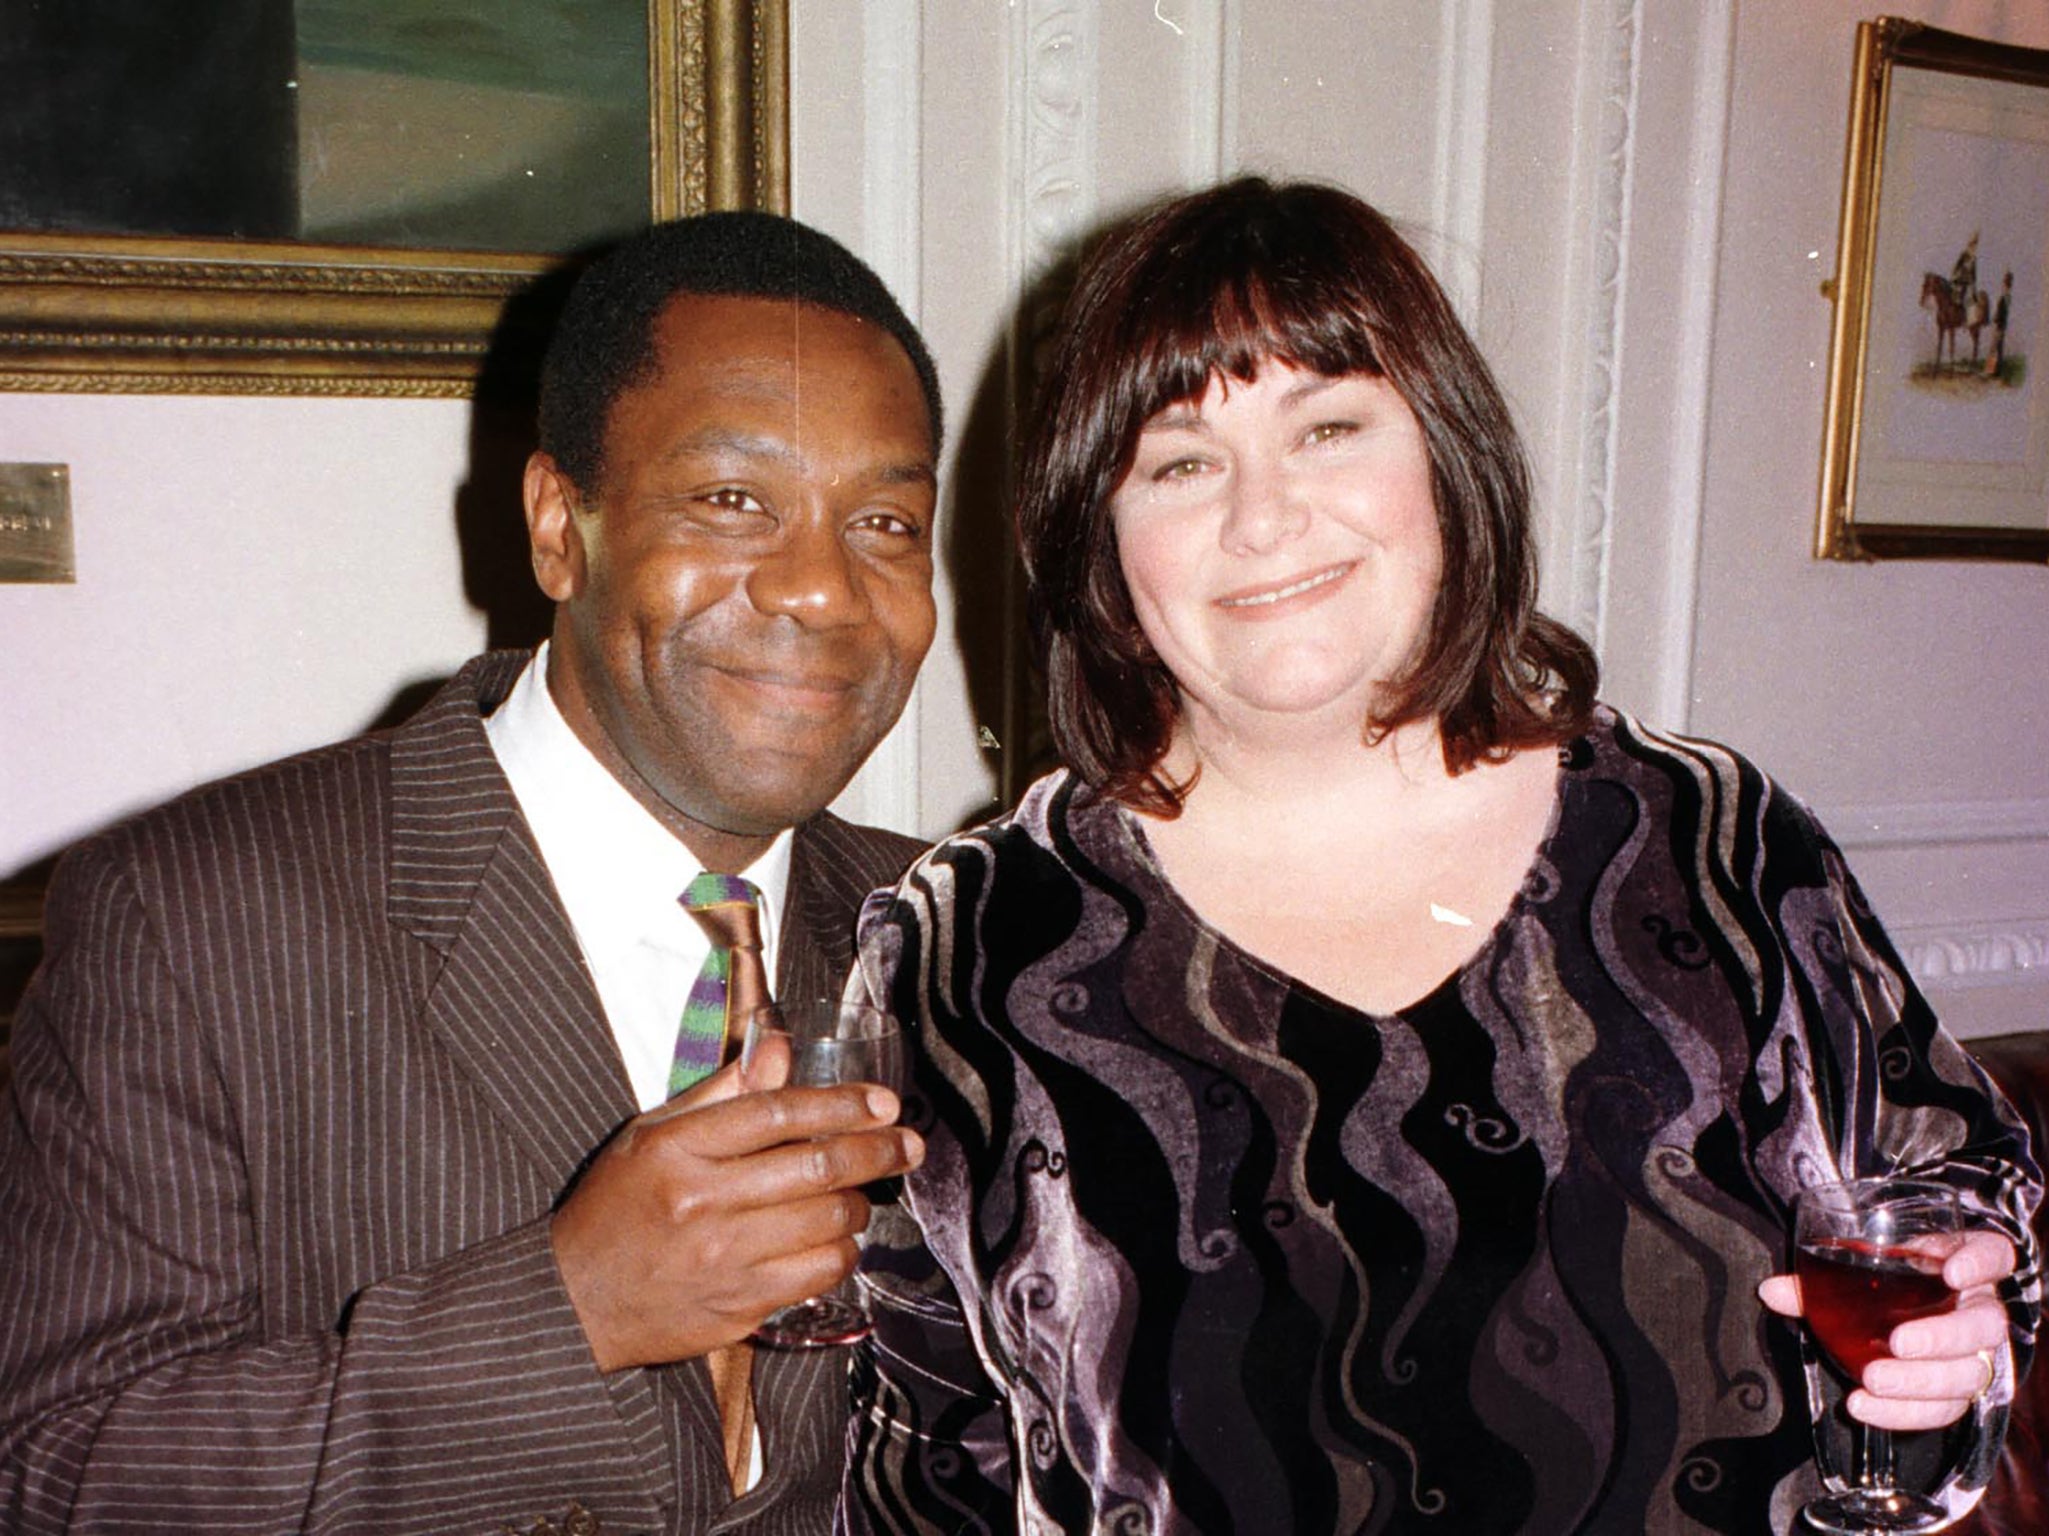 Lenny Henry and Dawn French, who’ve remained friends since their divorce